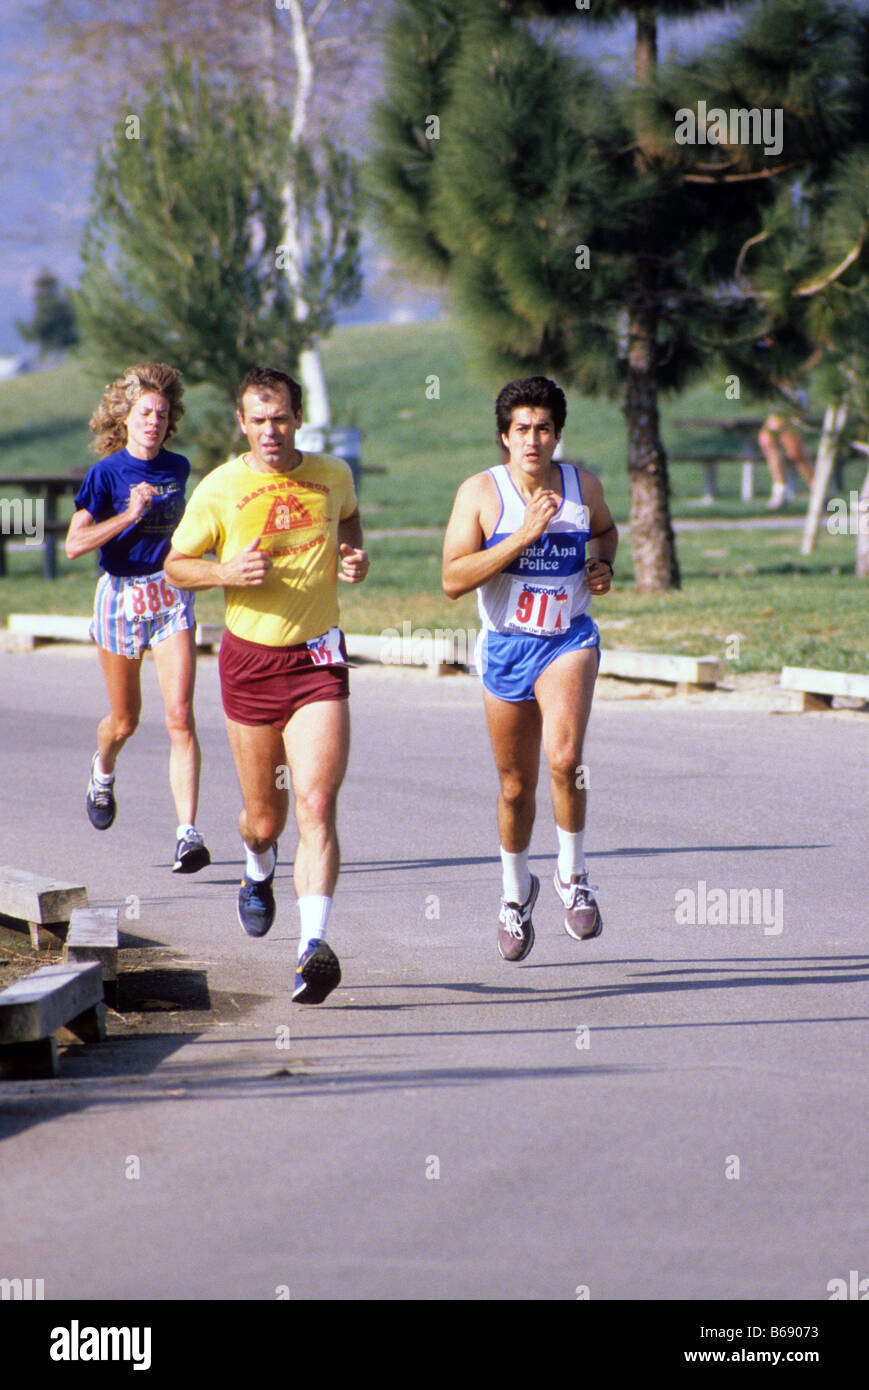 Runners compete in long distance race. Stock Photo